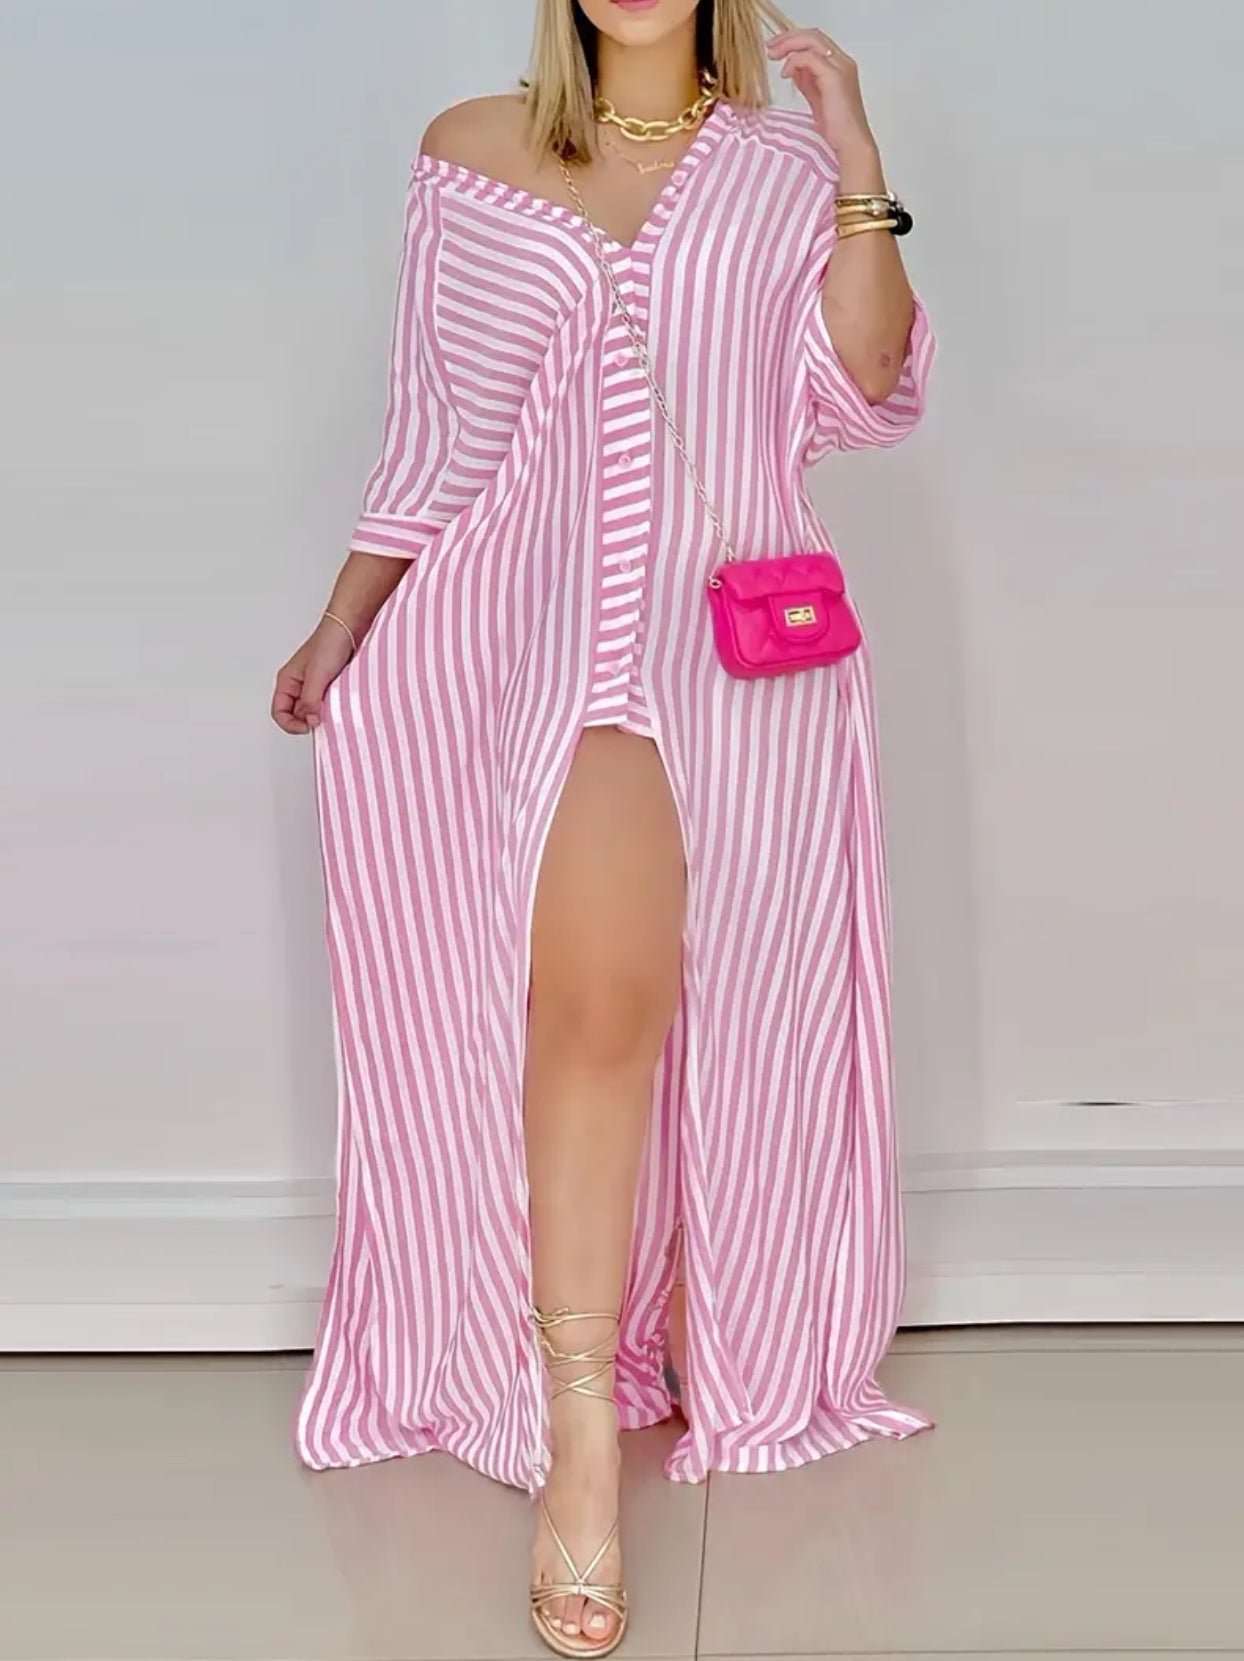 Solid Stripes Dress, Posh 💋 Mommies Collection